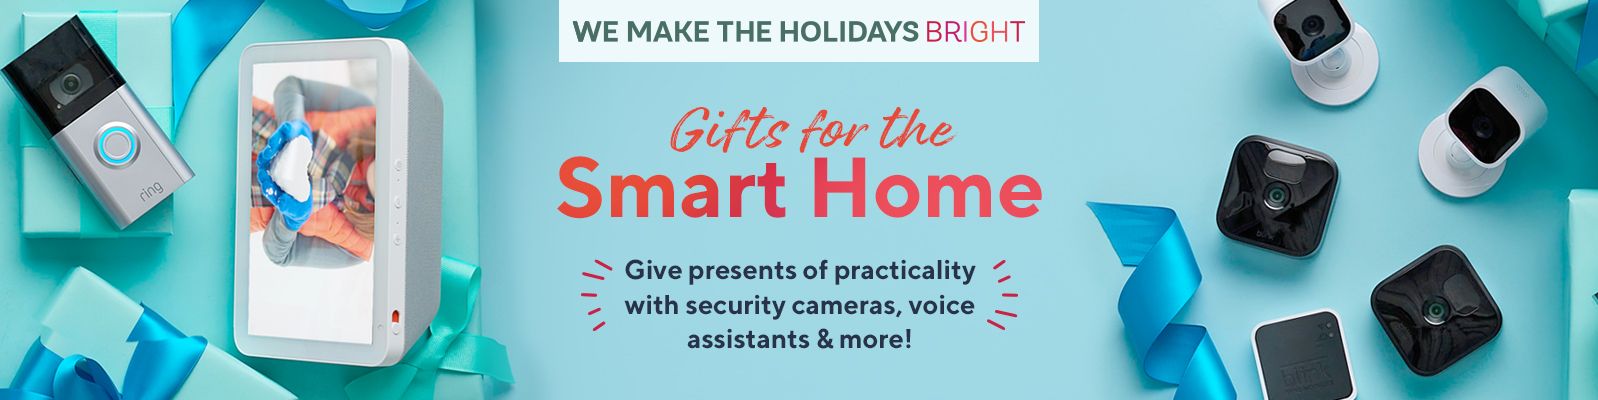 We Make The Holidays Bright - Gifts for the Smart Home - Give presents of practicality with security cameras, voice assistants & more!